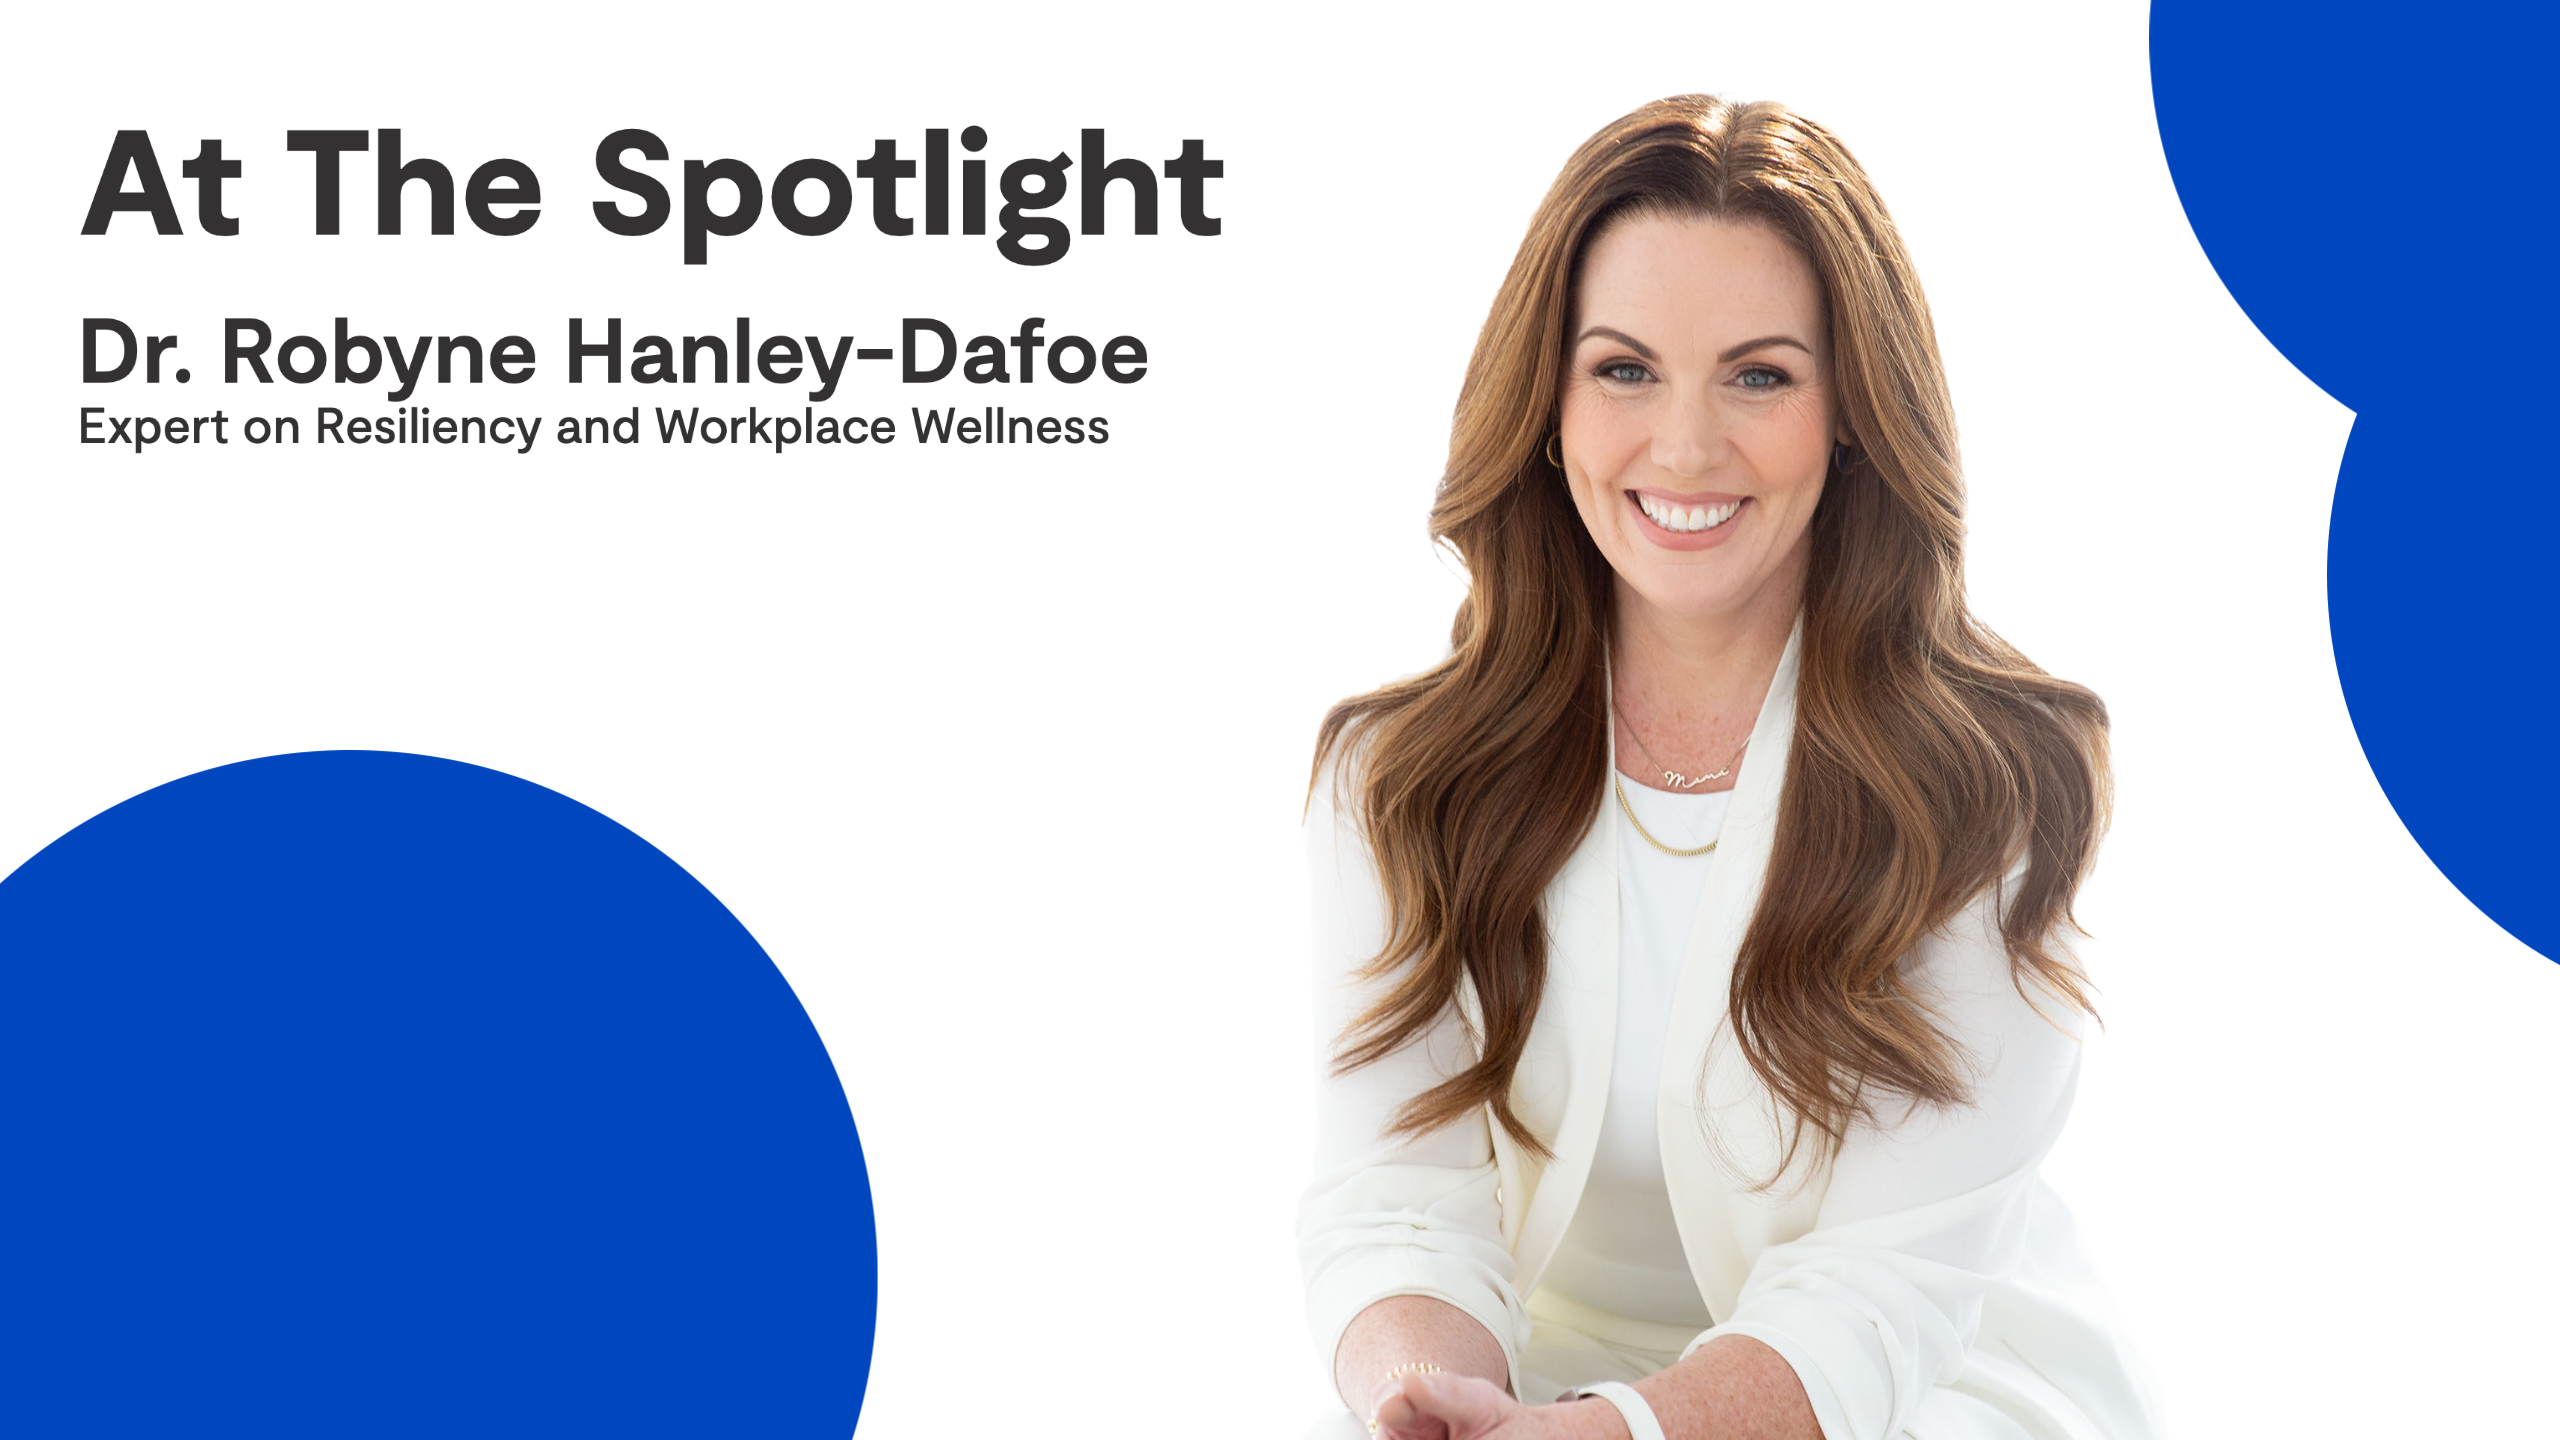 At The Spotlight with Dr. Robyne Hanley-Dafoe